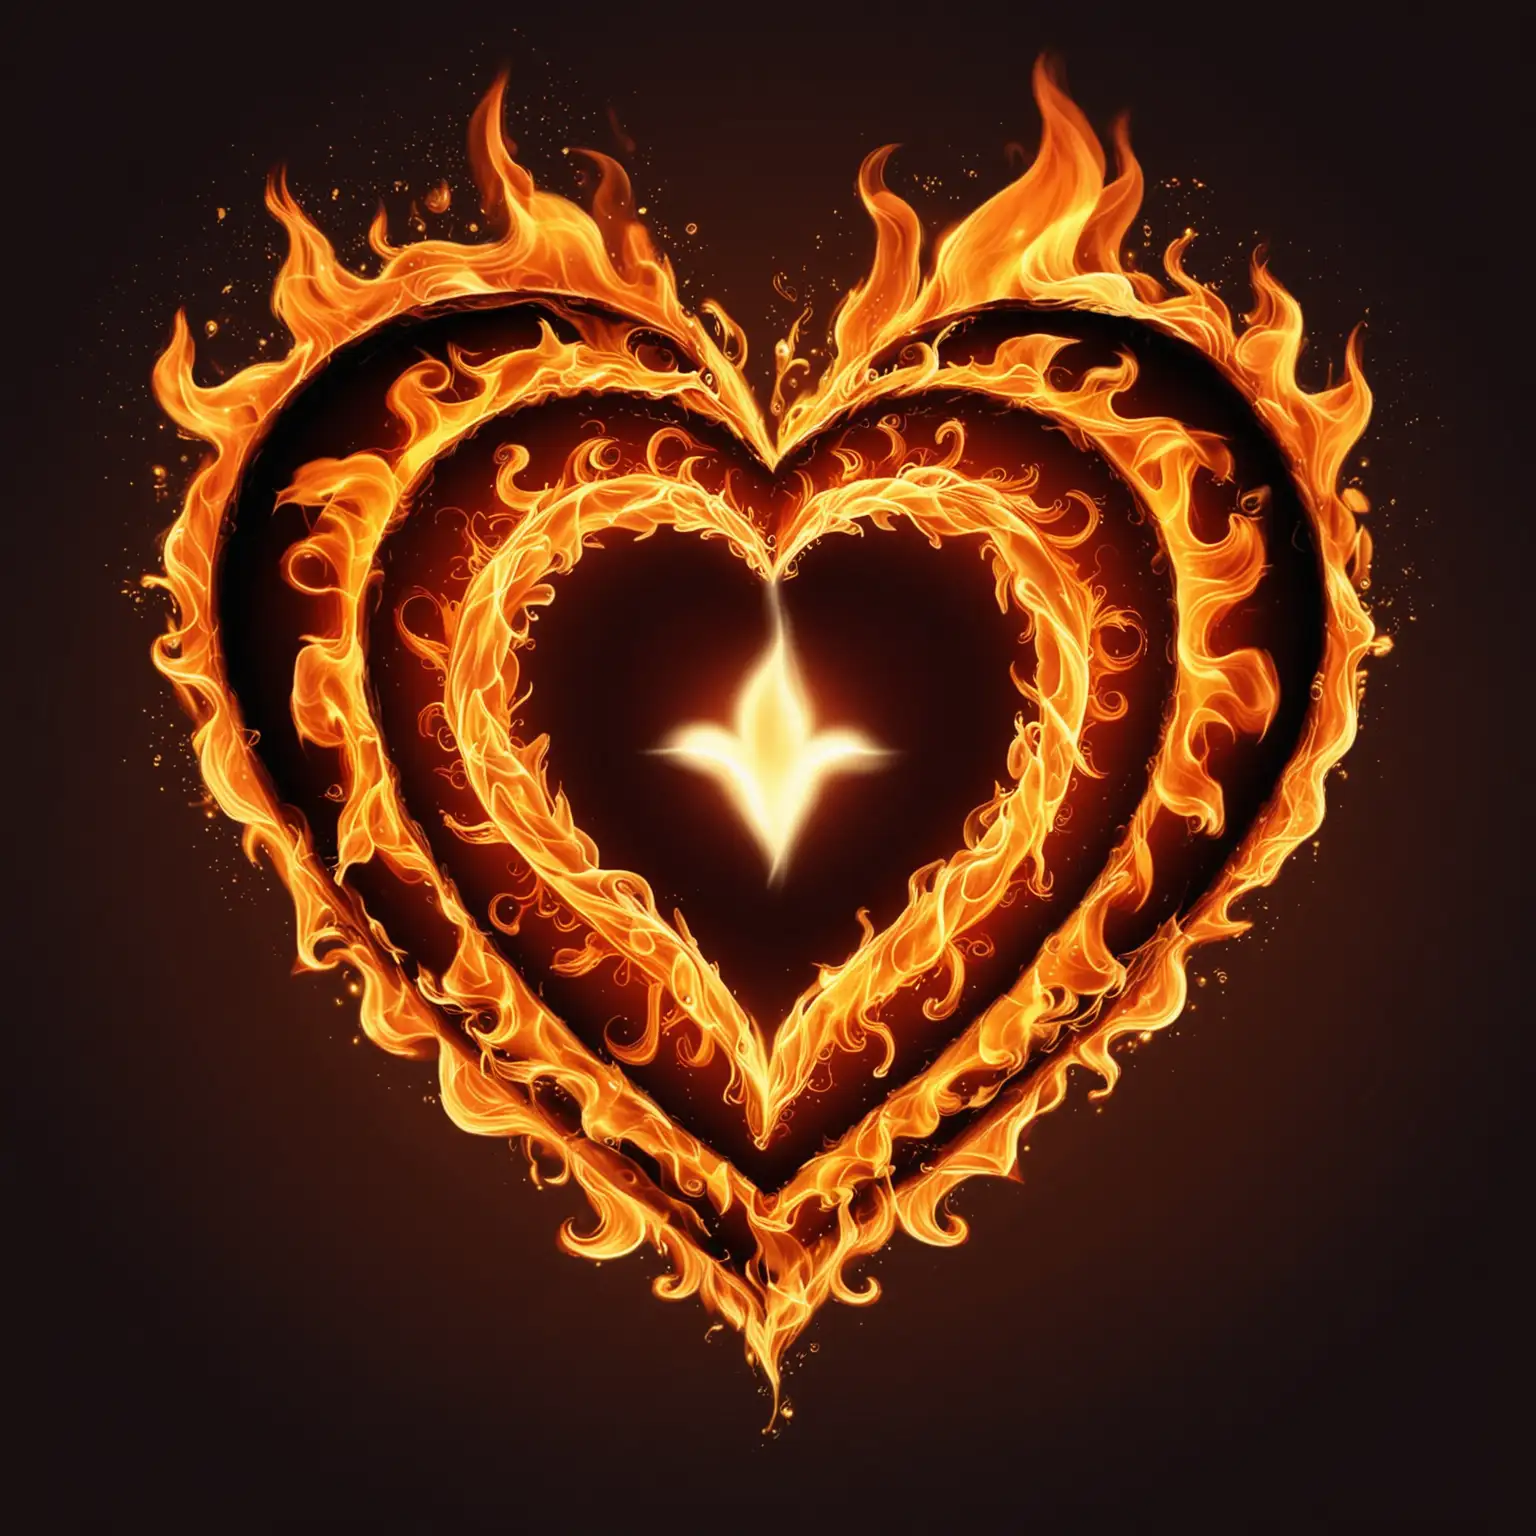 A heart with flames around it, hinduism 